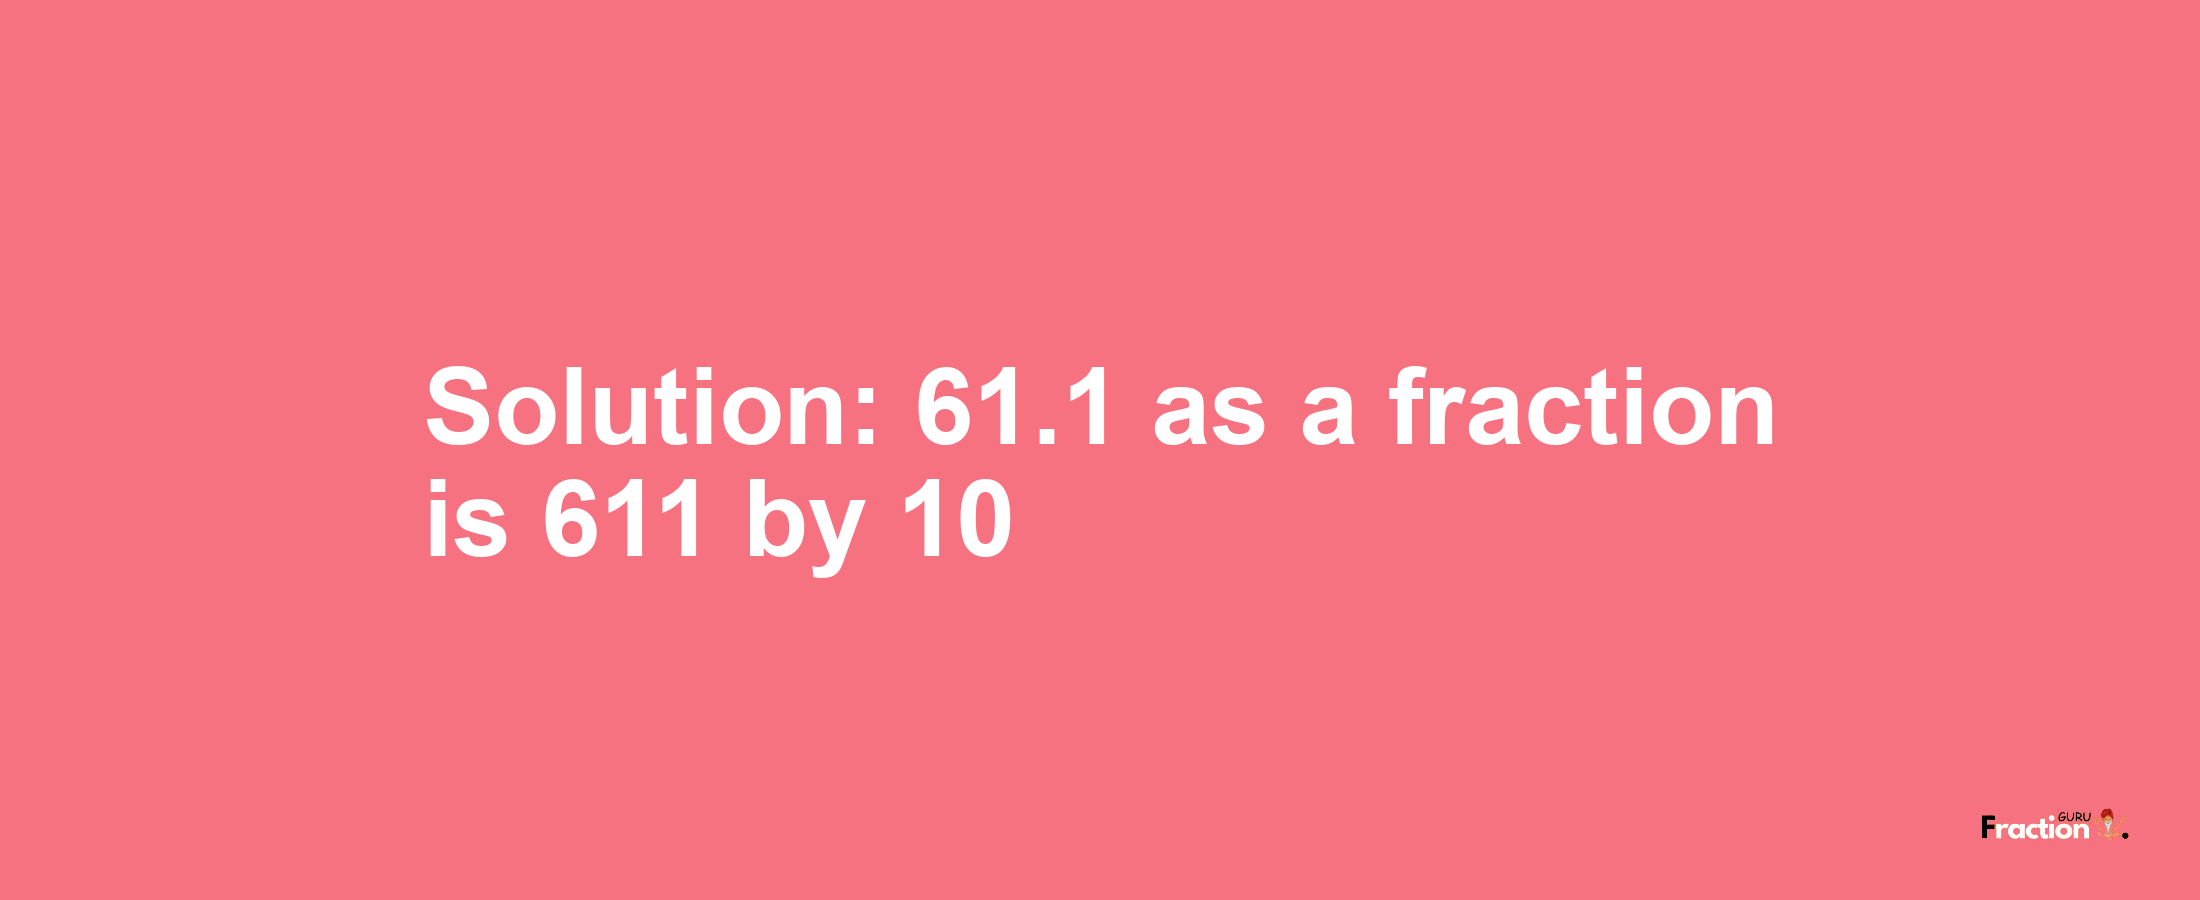 Solution:61.1 as a fraction is 611/10